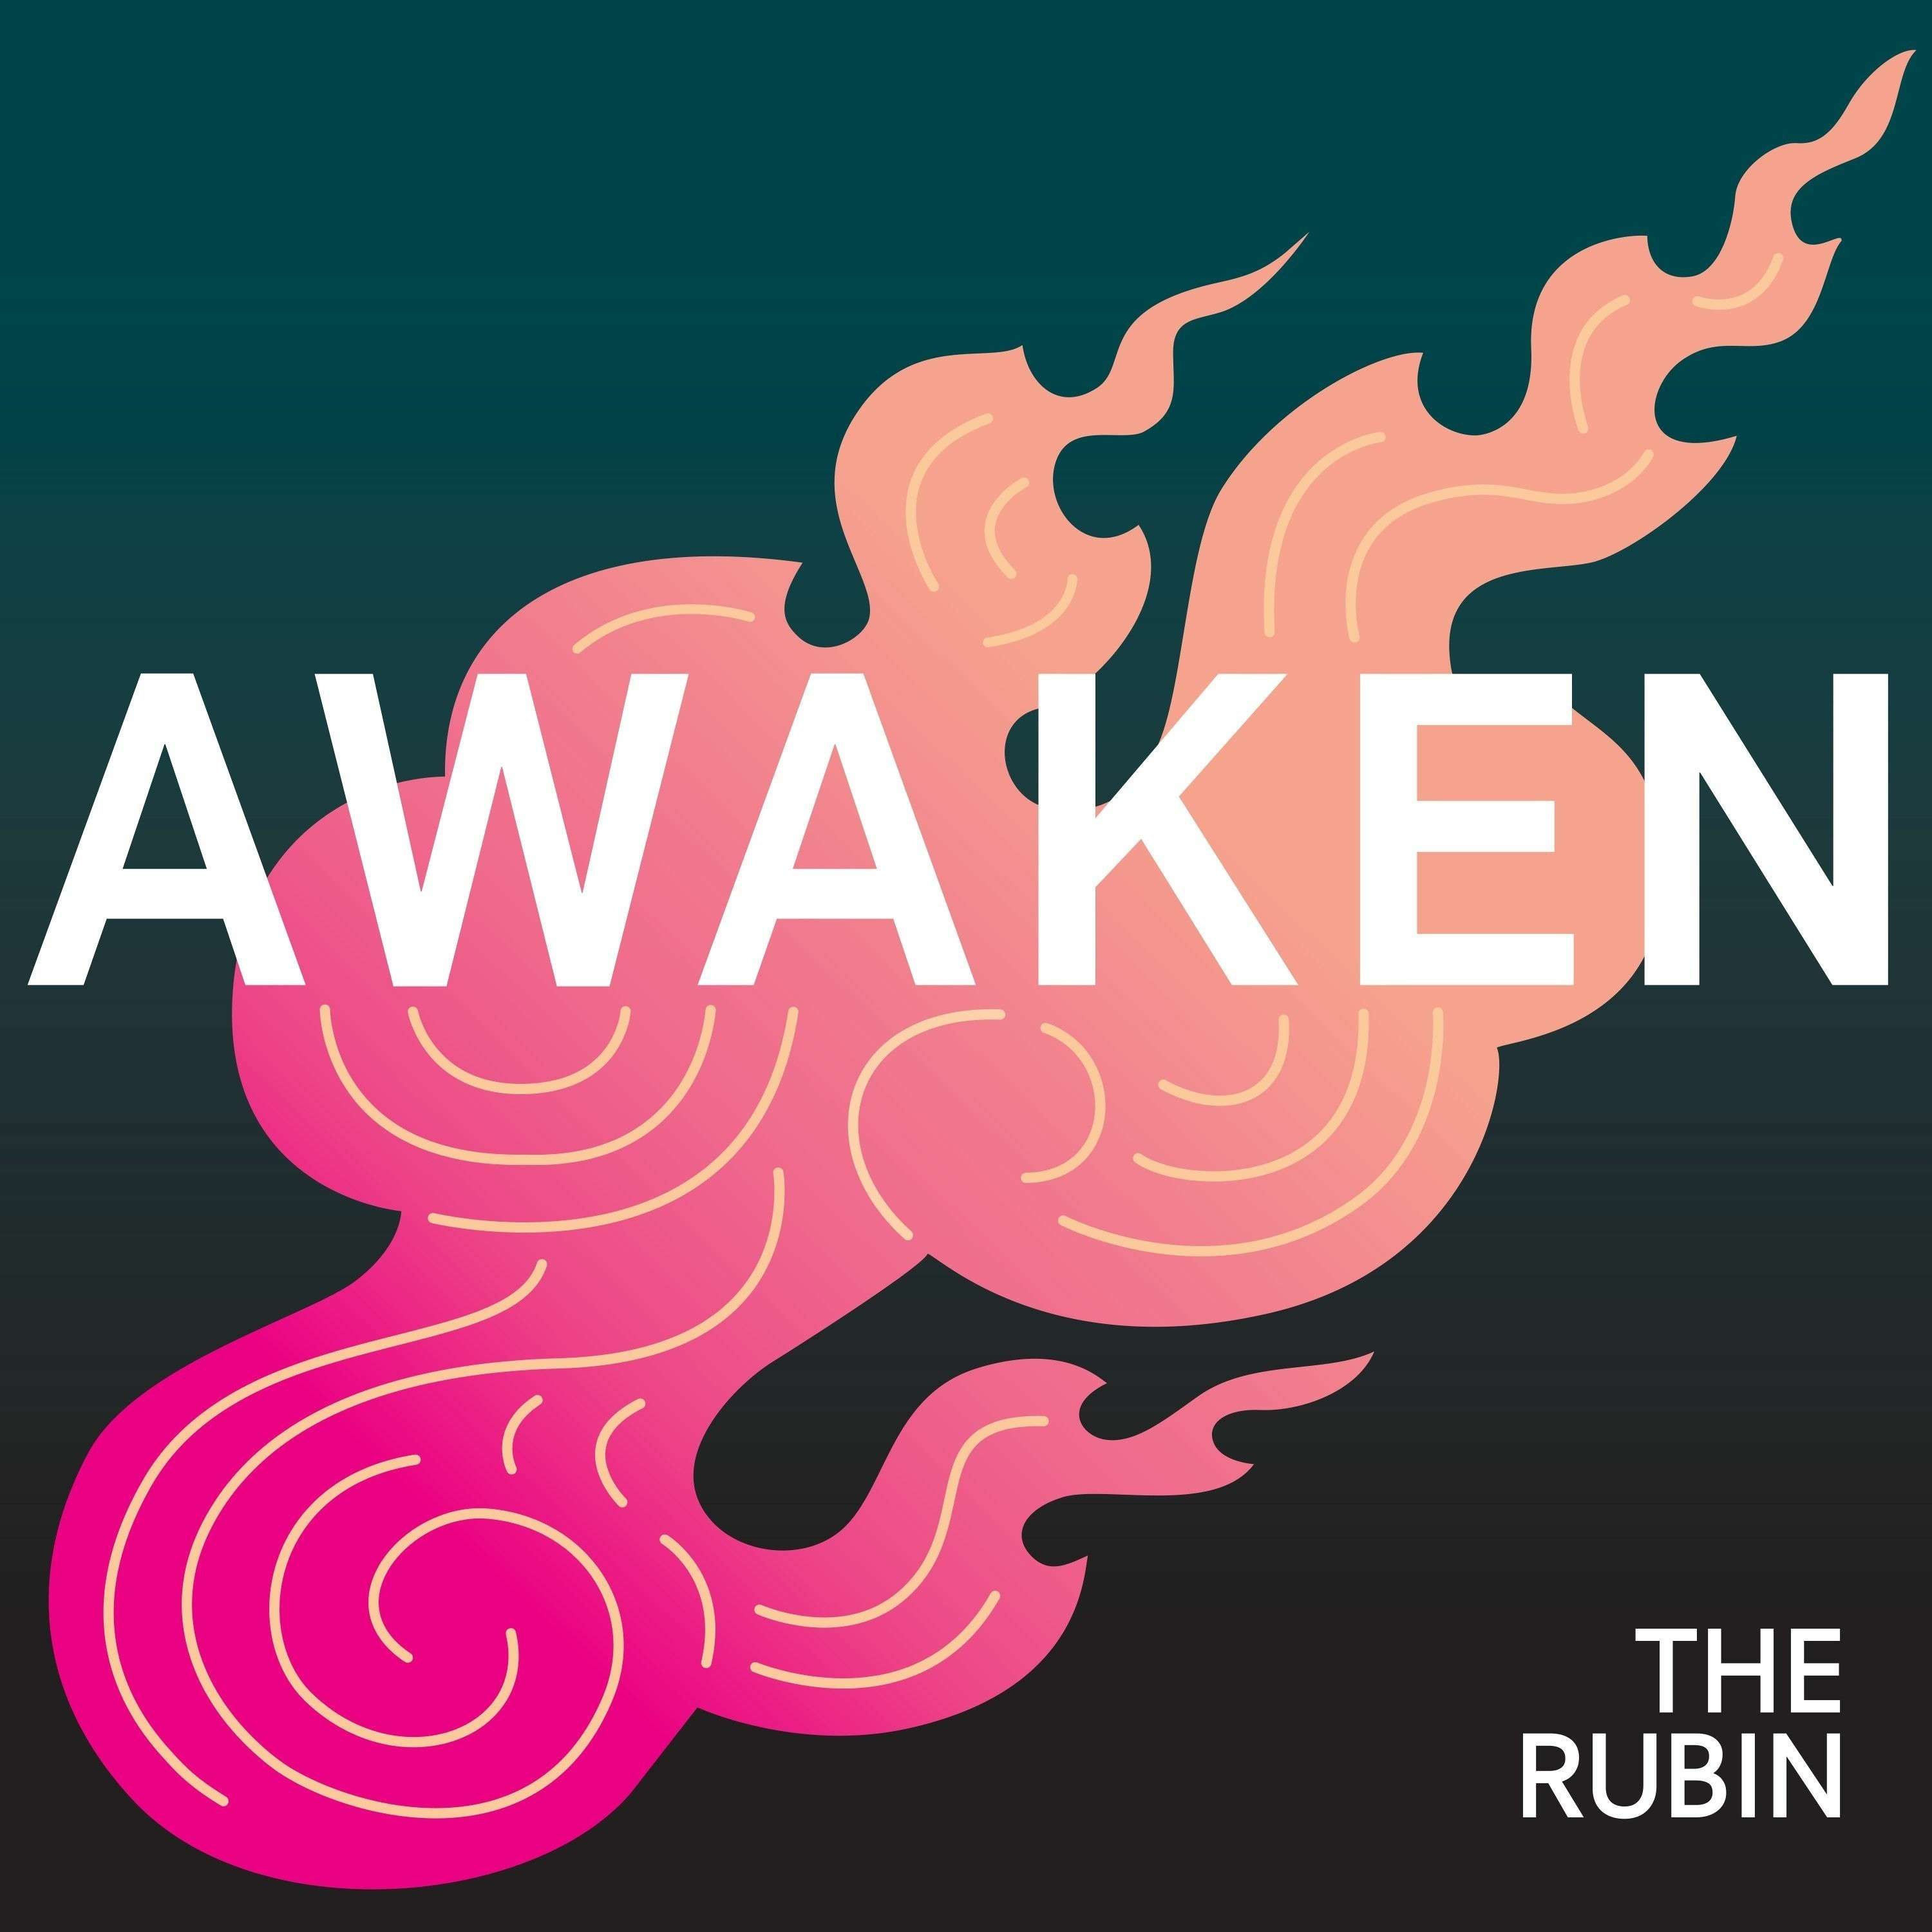 Welcome to Awaken Podcast - Trailer